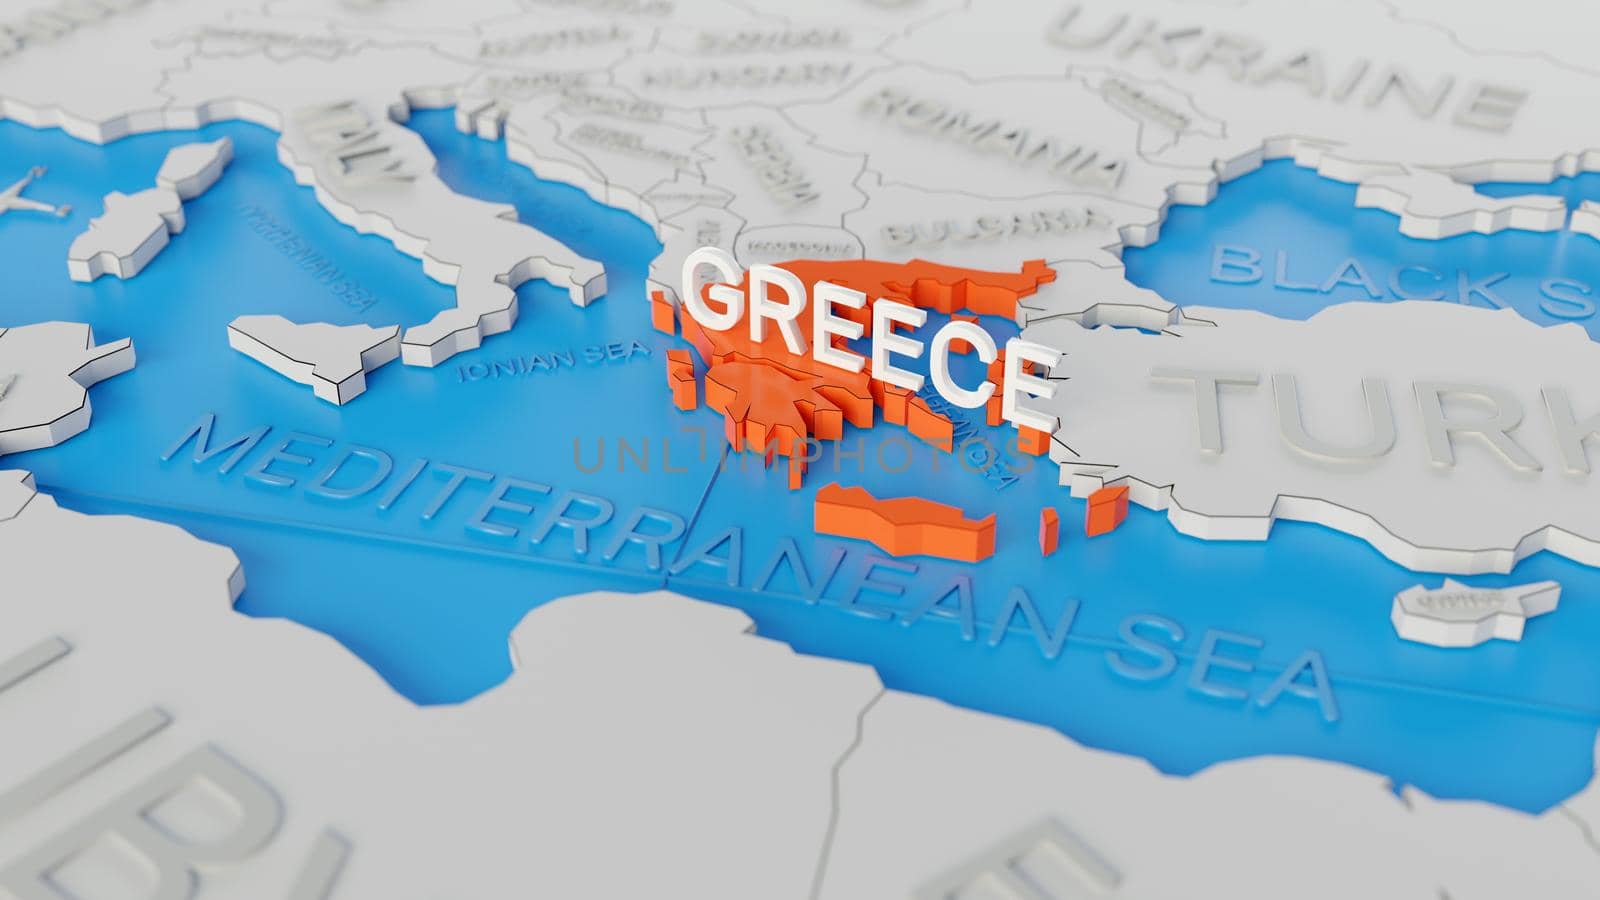 Greece highlighted on a white simplified 3D world map. Digital 3D render.